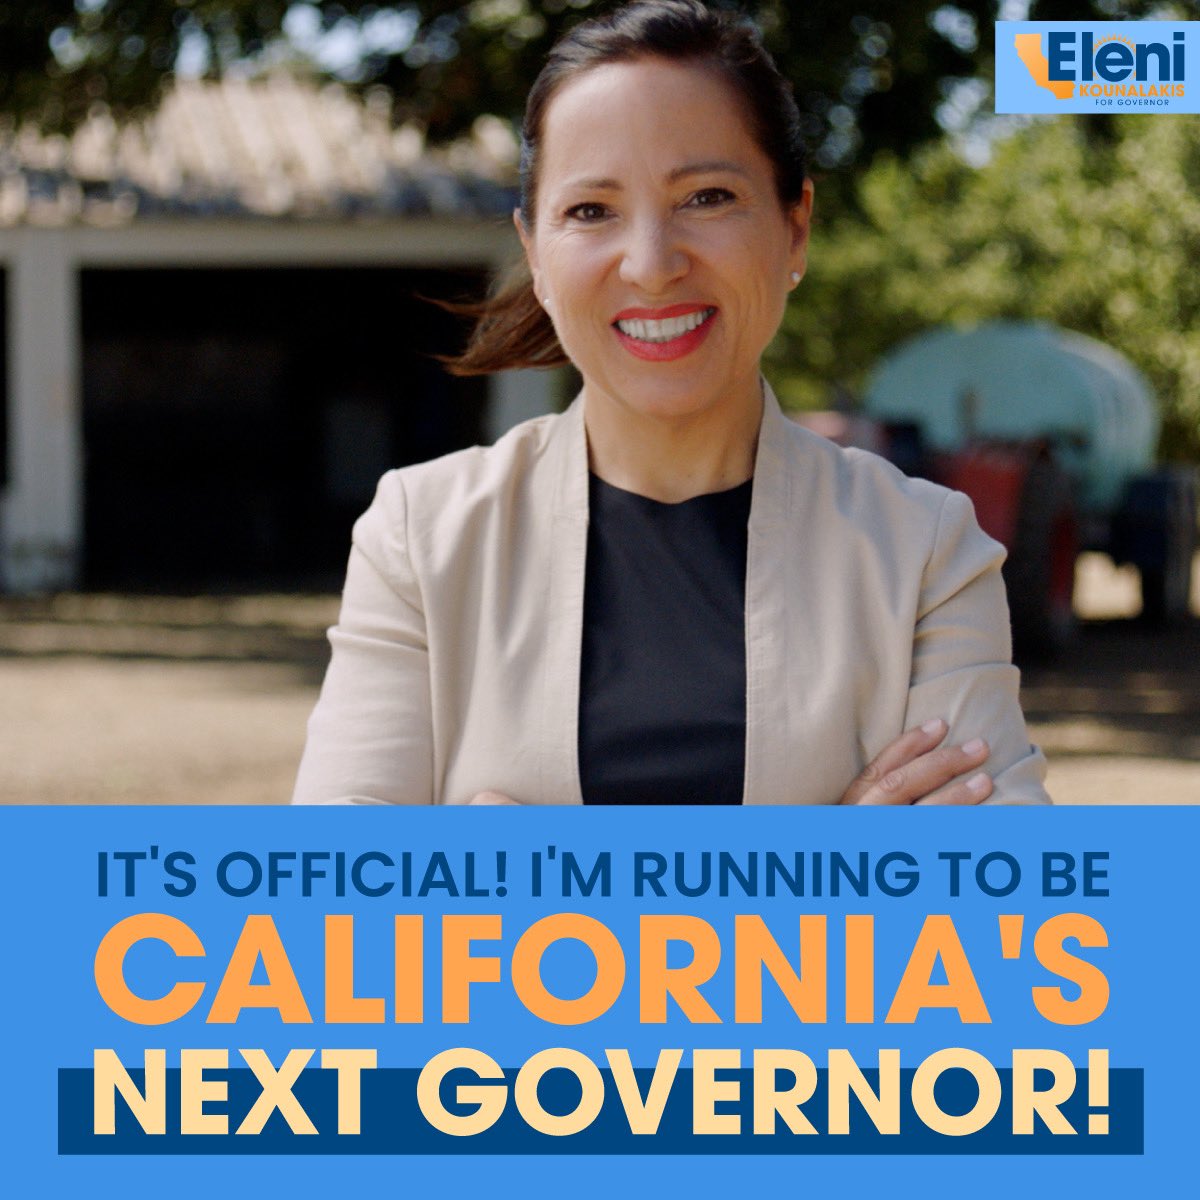 Today I'm launching my campaign to become the next Governor of the great state of CA. My family & I owe everything to our state. I will fight fiercely to make sure EVERY Californian has the chance to walk the path of the CA dream just like I have. Join us eleniforca.com